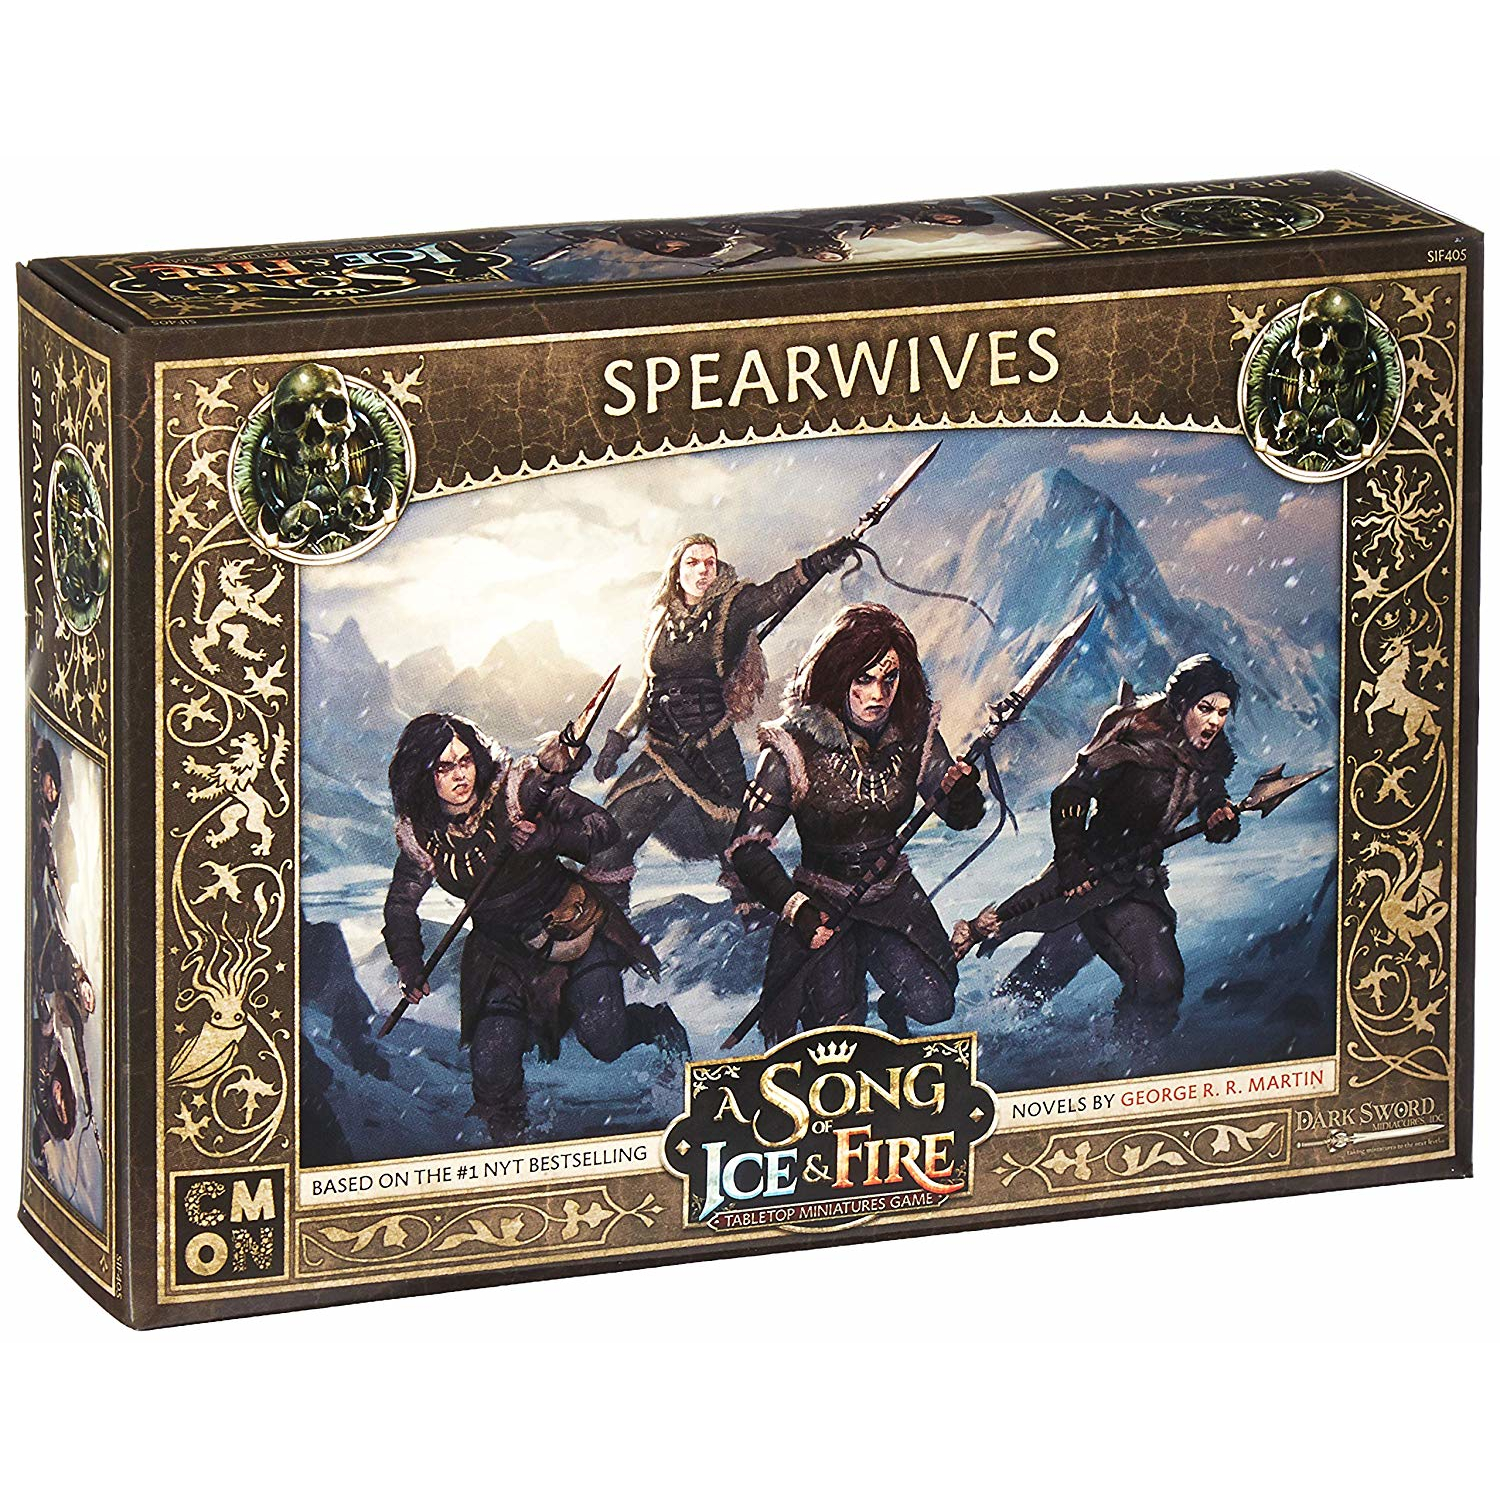 A Song of Ice and Fire: Tabletop Miniatures Game Free Folk Spearwives Unit Box, by CMON - image 1 of 7